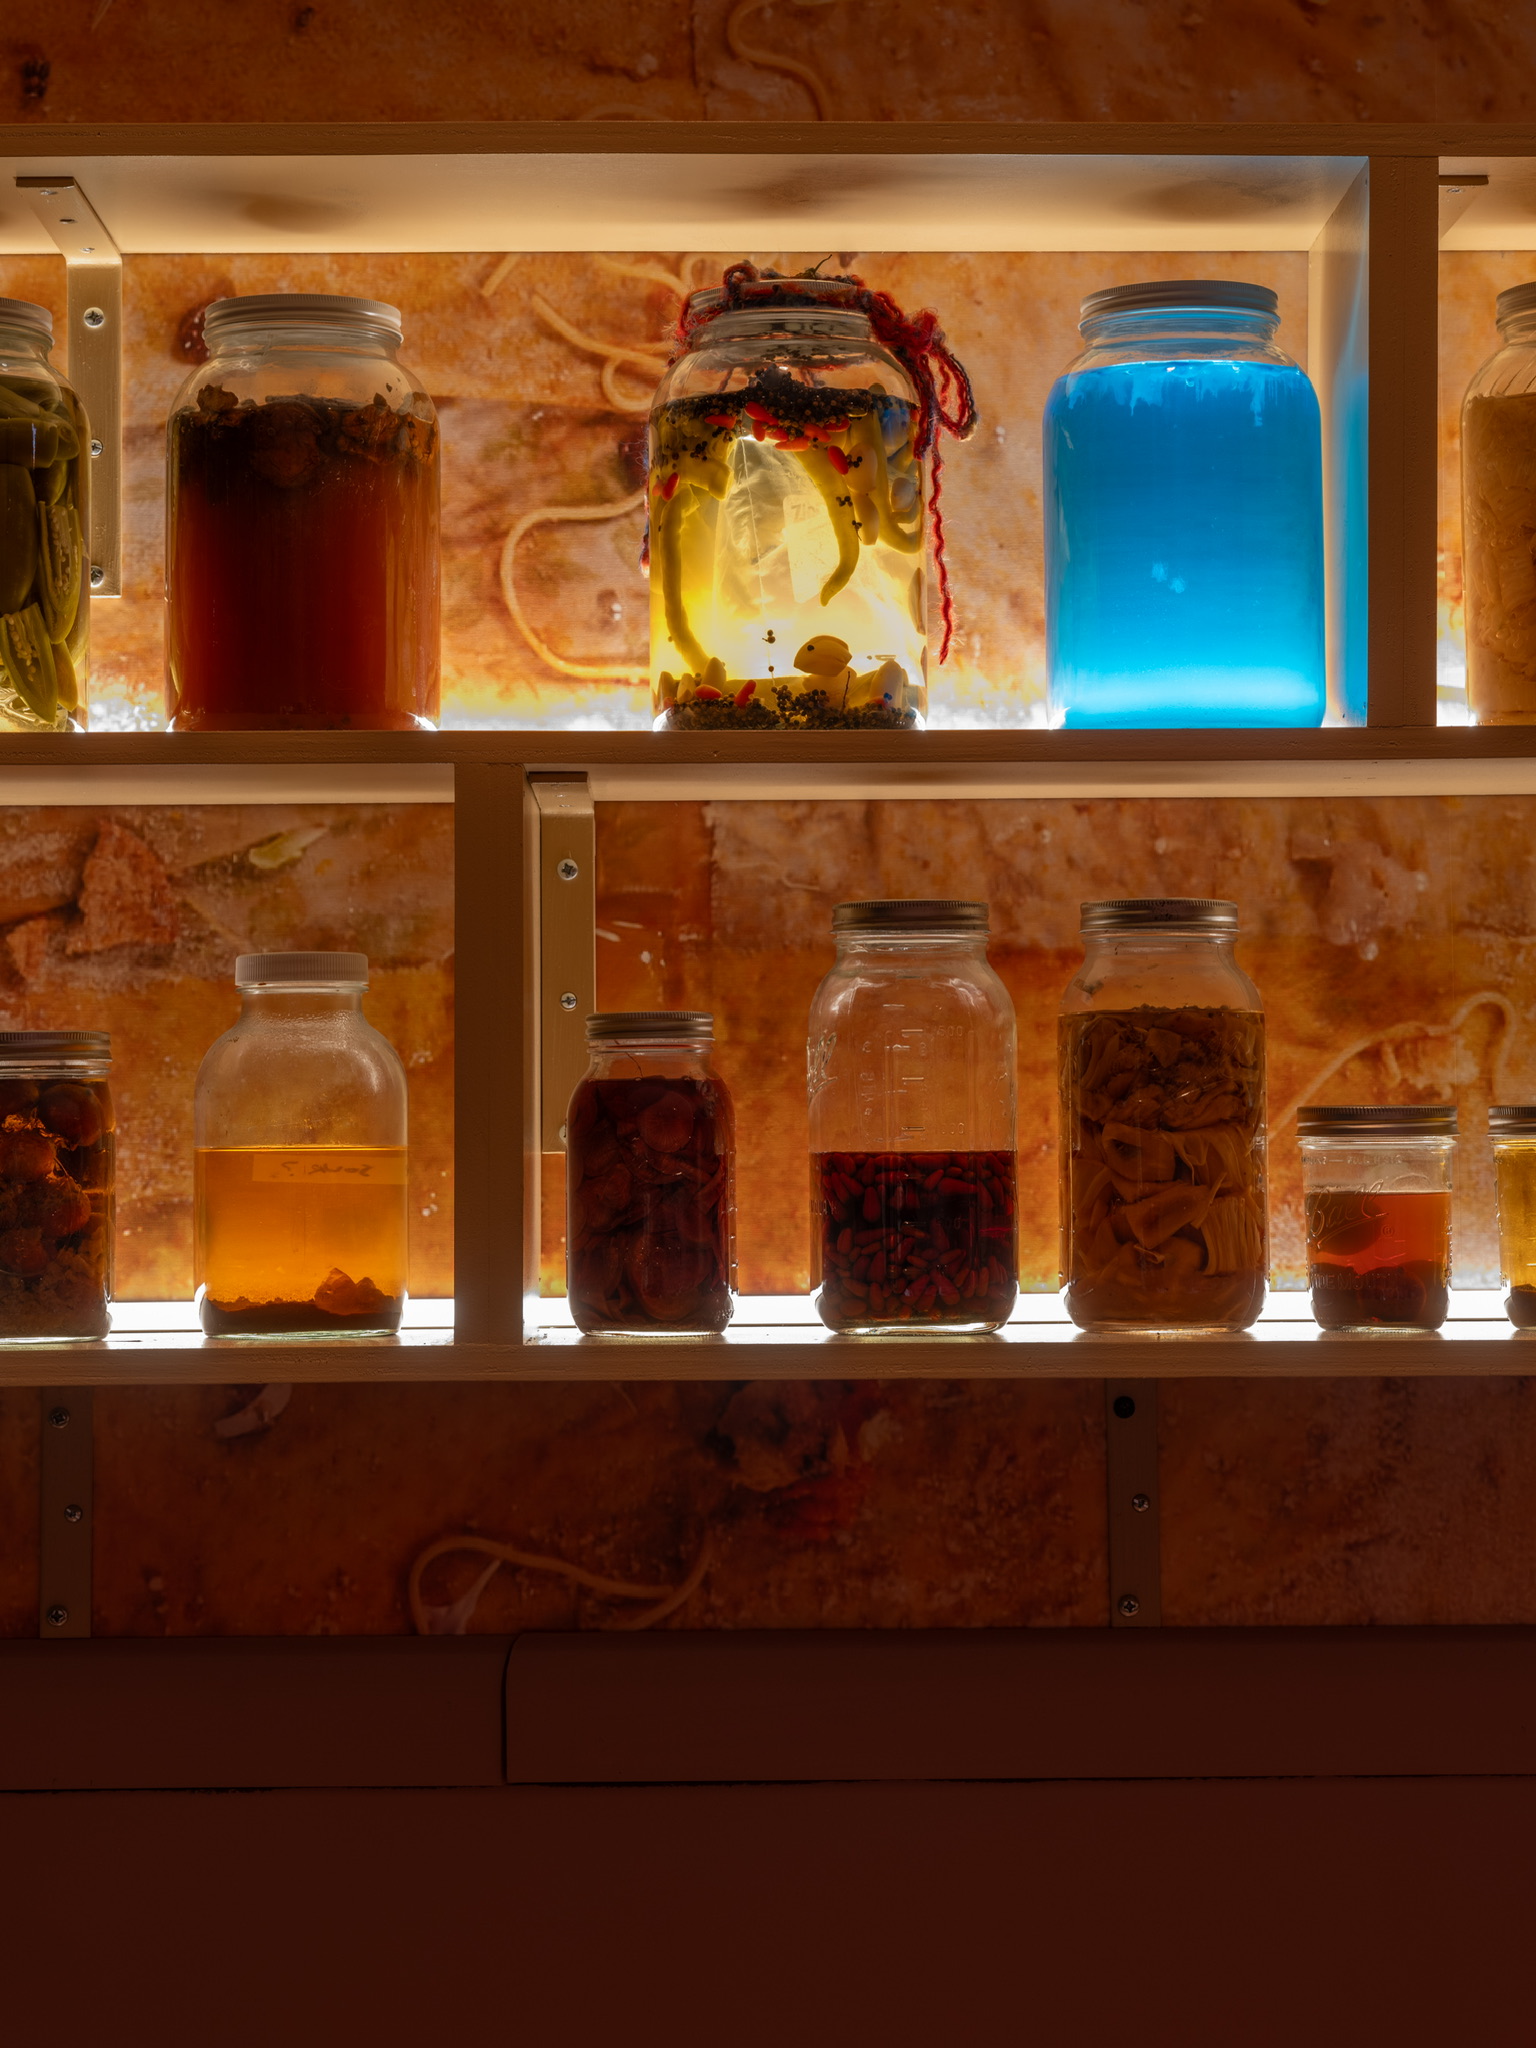 Backlit shelves with mason jars of varying sizes filled with fermented liquids.